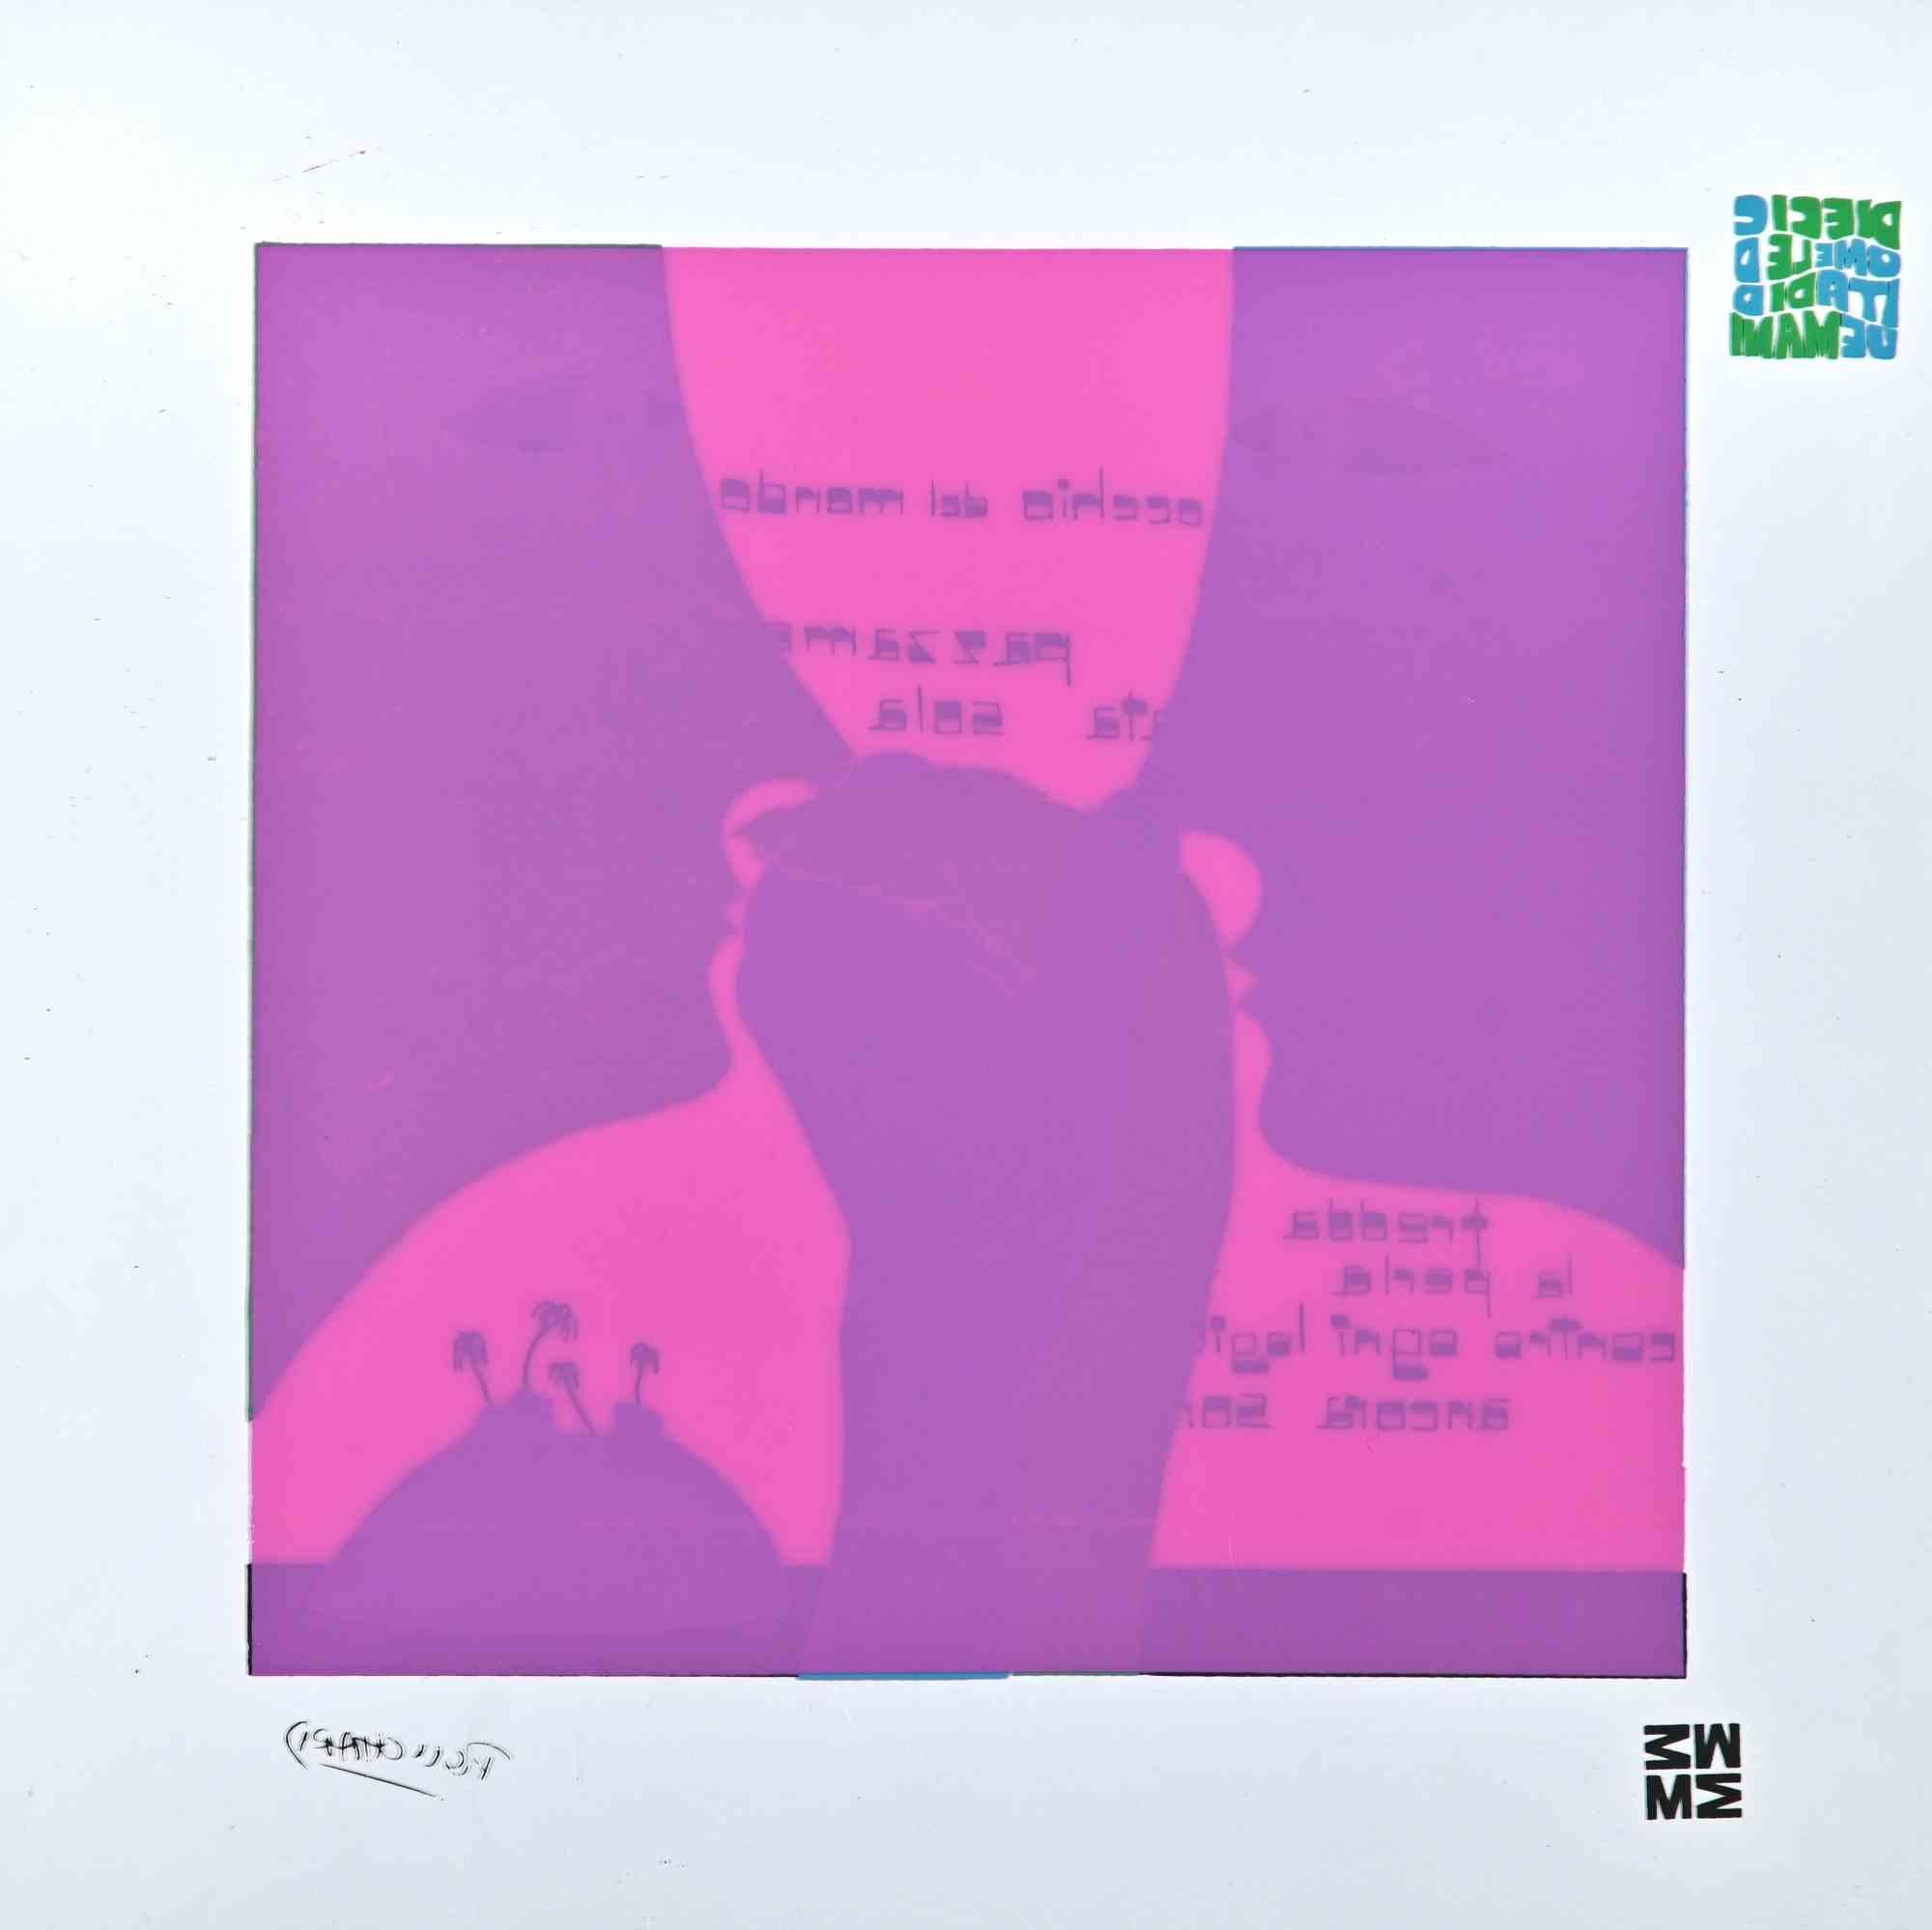 Una Perla is a color silk-screen print on acetates, realized in  1973  by the artist  Ennio Pouchard  (1928).

Signed on plate  on the lower right.

From the porfolio 